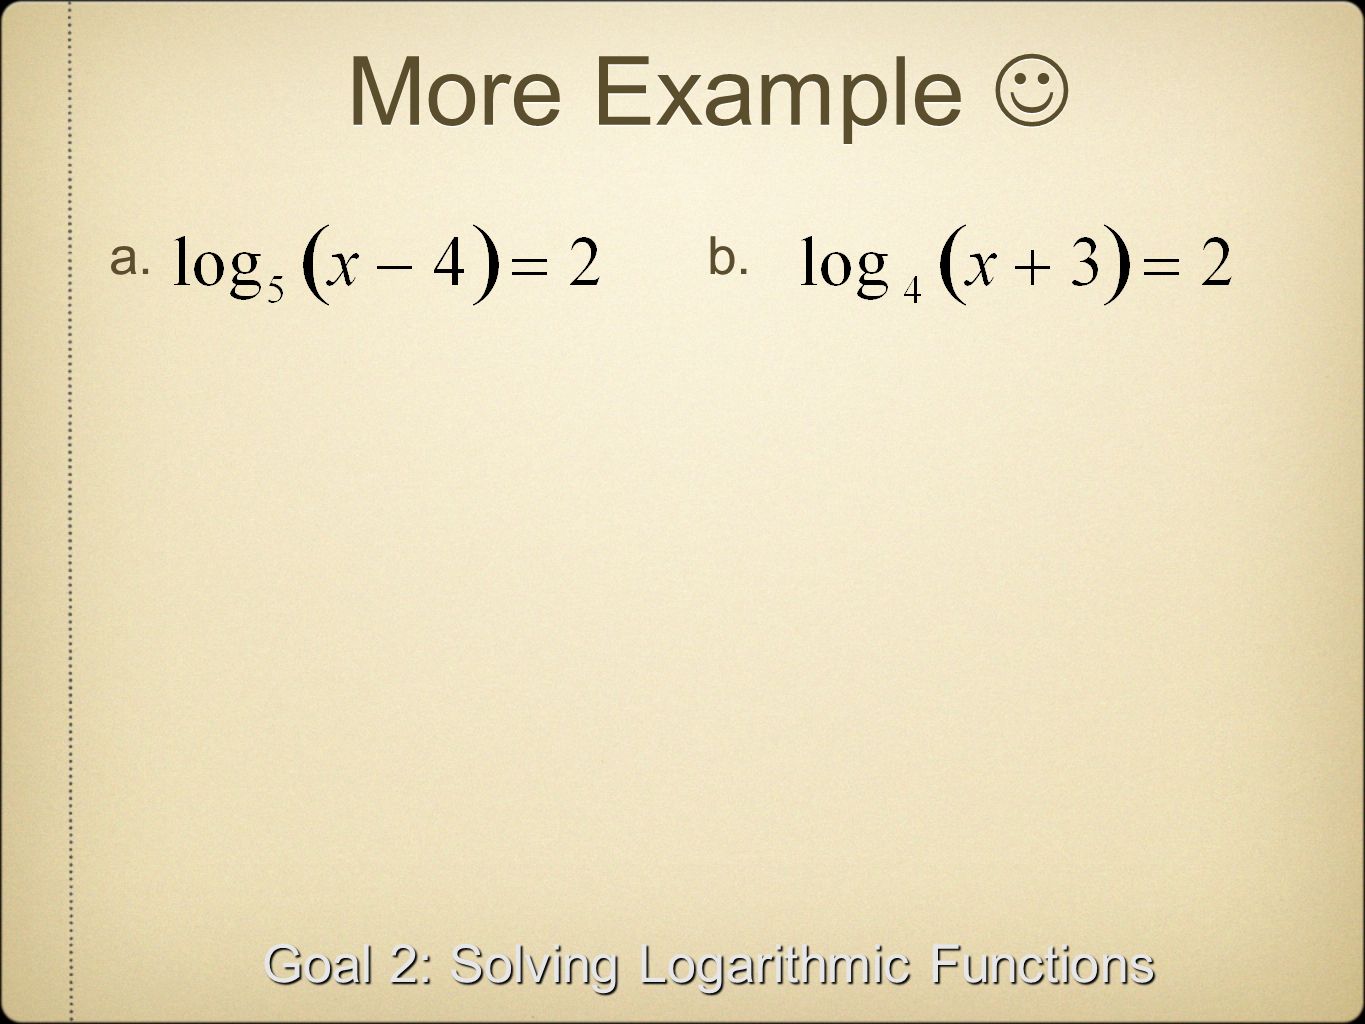 More Example Goal 2: Solving Logarithmic Functions a.b.